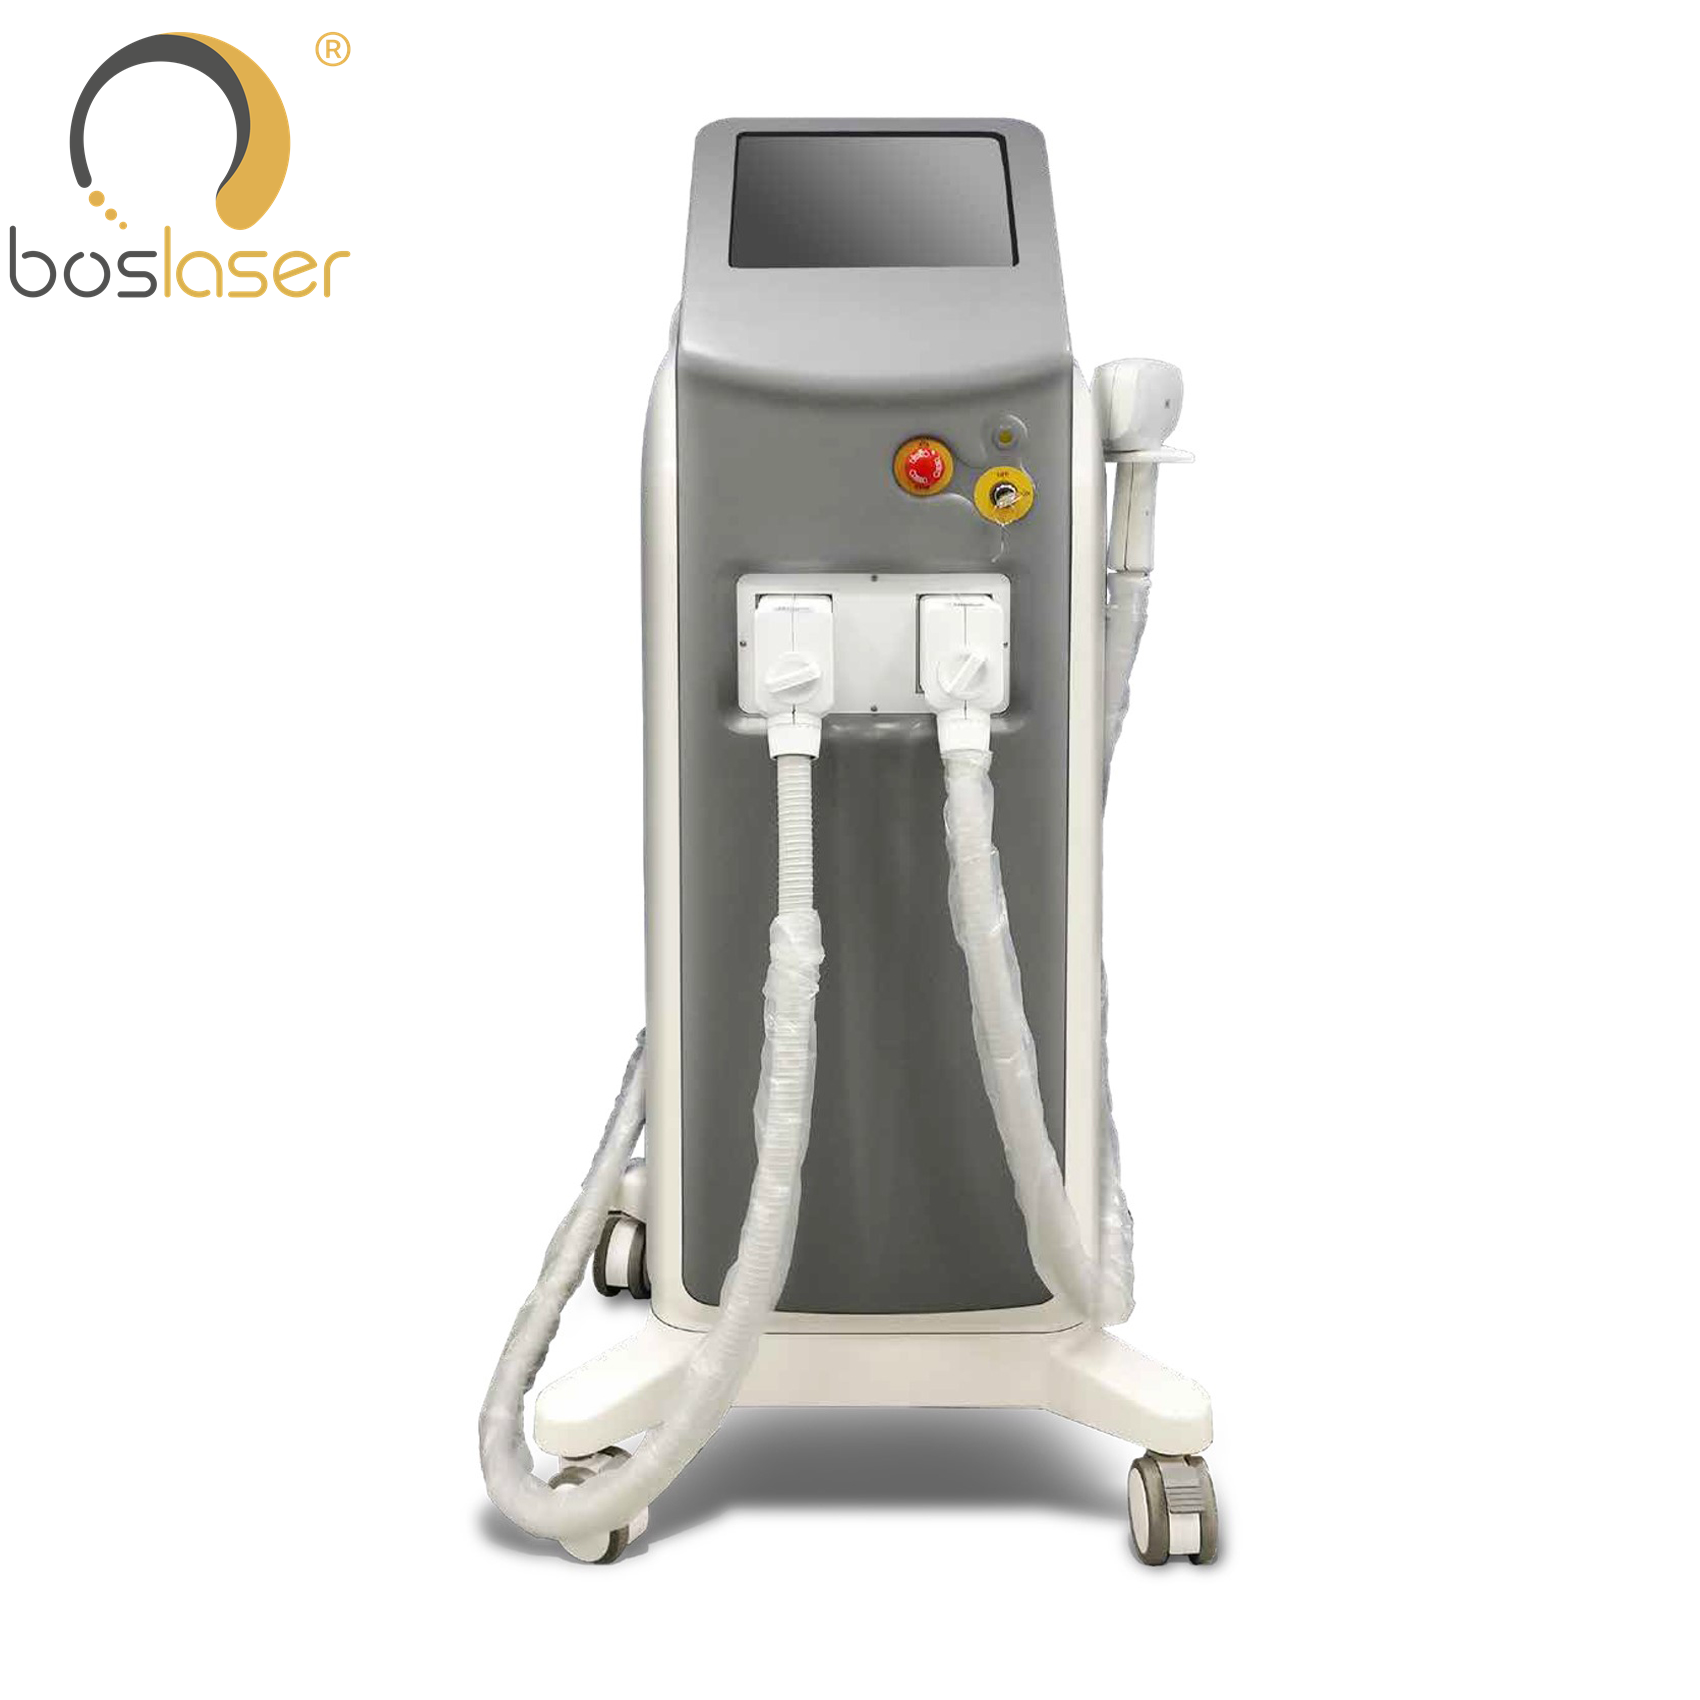 Laser and light source of laser hair removal machine Long pulse Nd: YAG laser pulsed light Featured Image